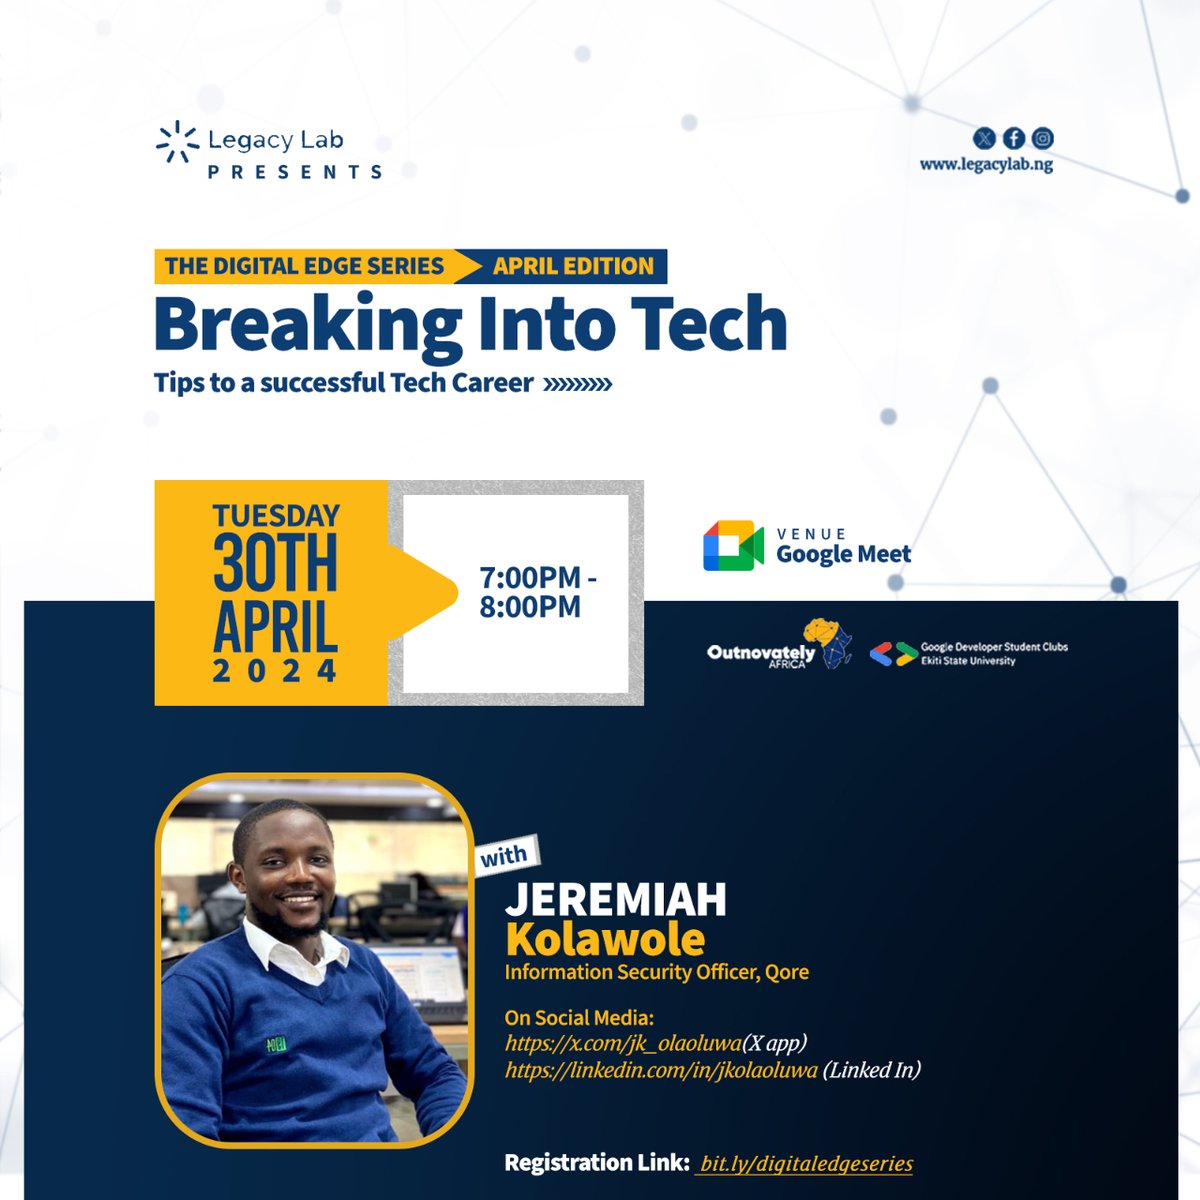 Who's ready to level up their tech game? Join Jeremiah Kolawole @jk_olaoluwa for The Digital Edge Series: Breaking into Tech.
Reserve a seat at bit.ly/digitaledgeser… and let's break into tech together.
#TheDigitalEdgeSeries #BreakingIntoTech #TechCareer #TechEvent #VirtualEvent